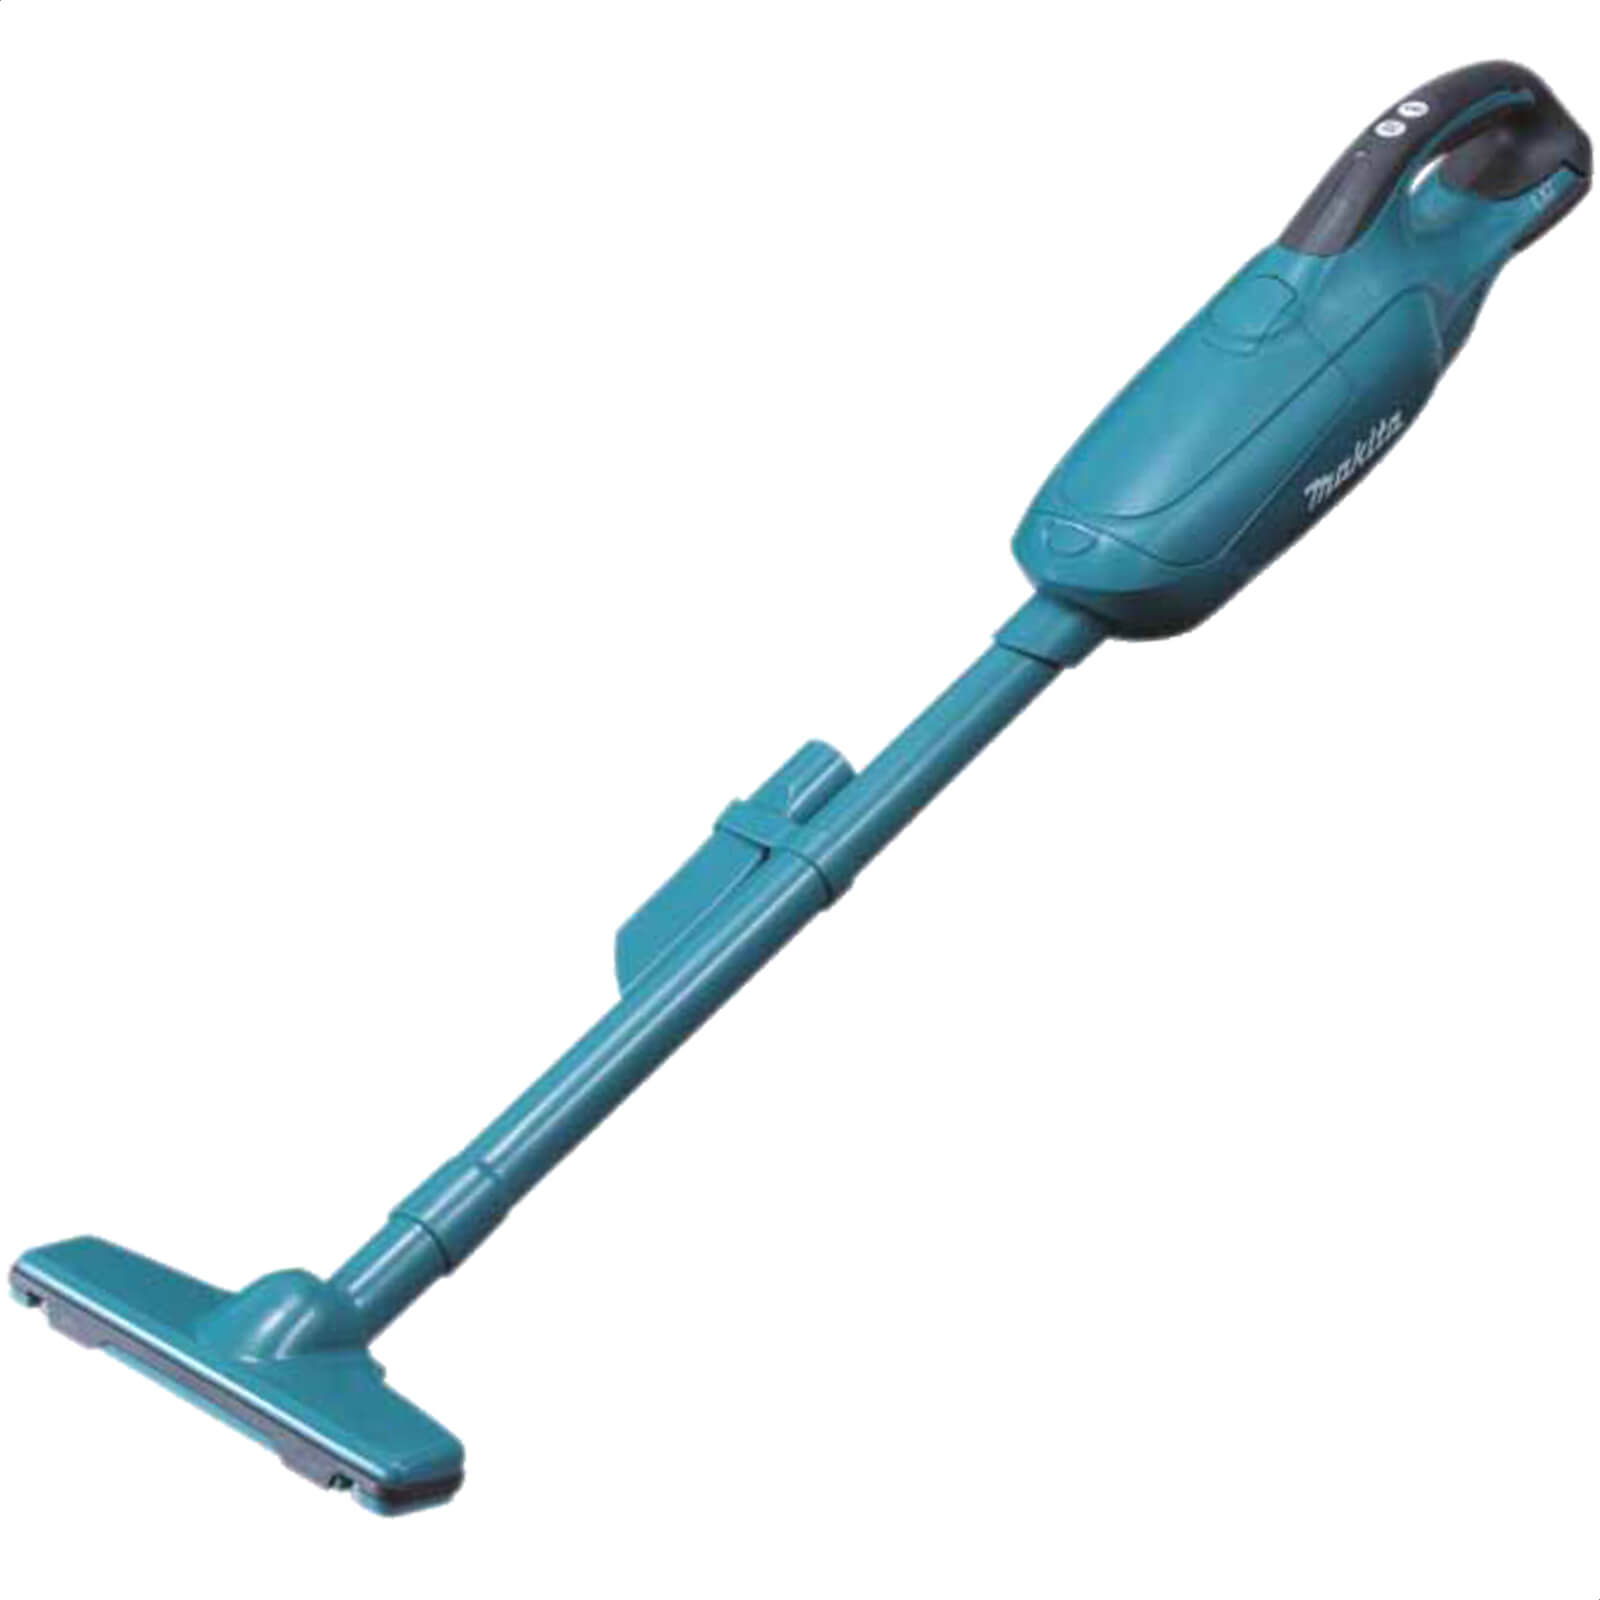 Image of Makita DCL182 18v LXT Cordless Vacuum Cleaner No Batteries No Charger